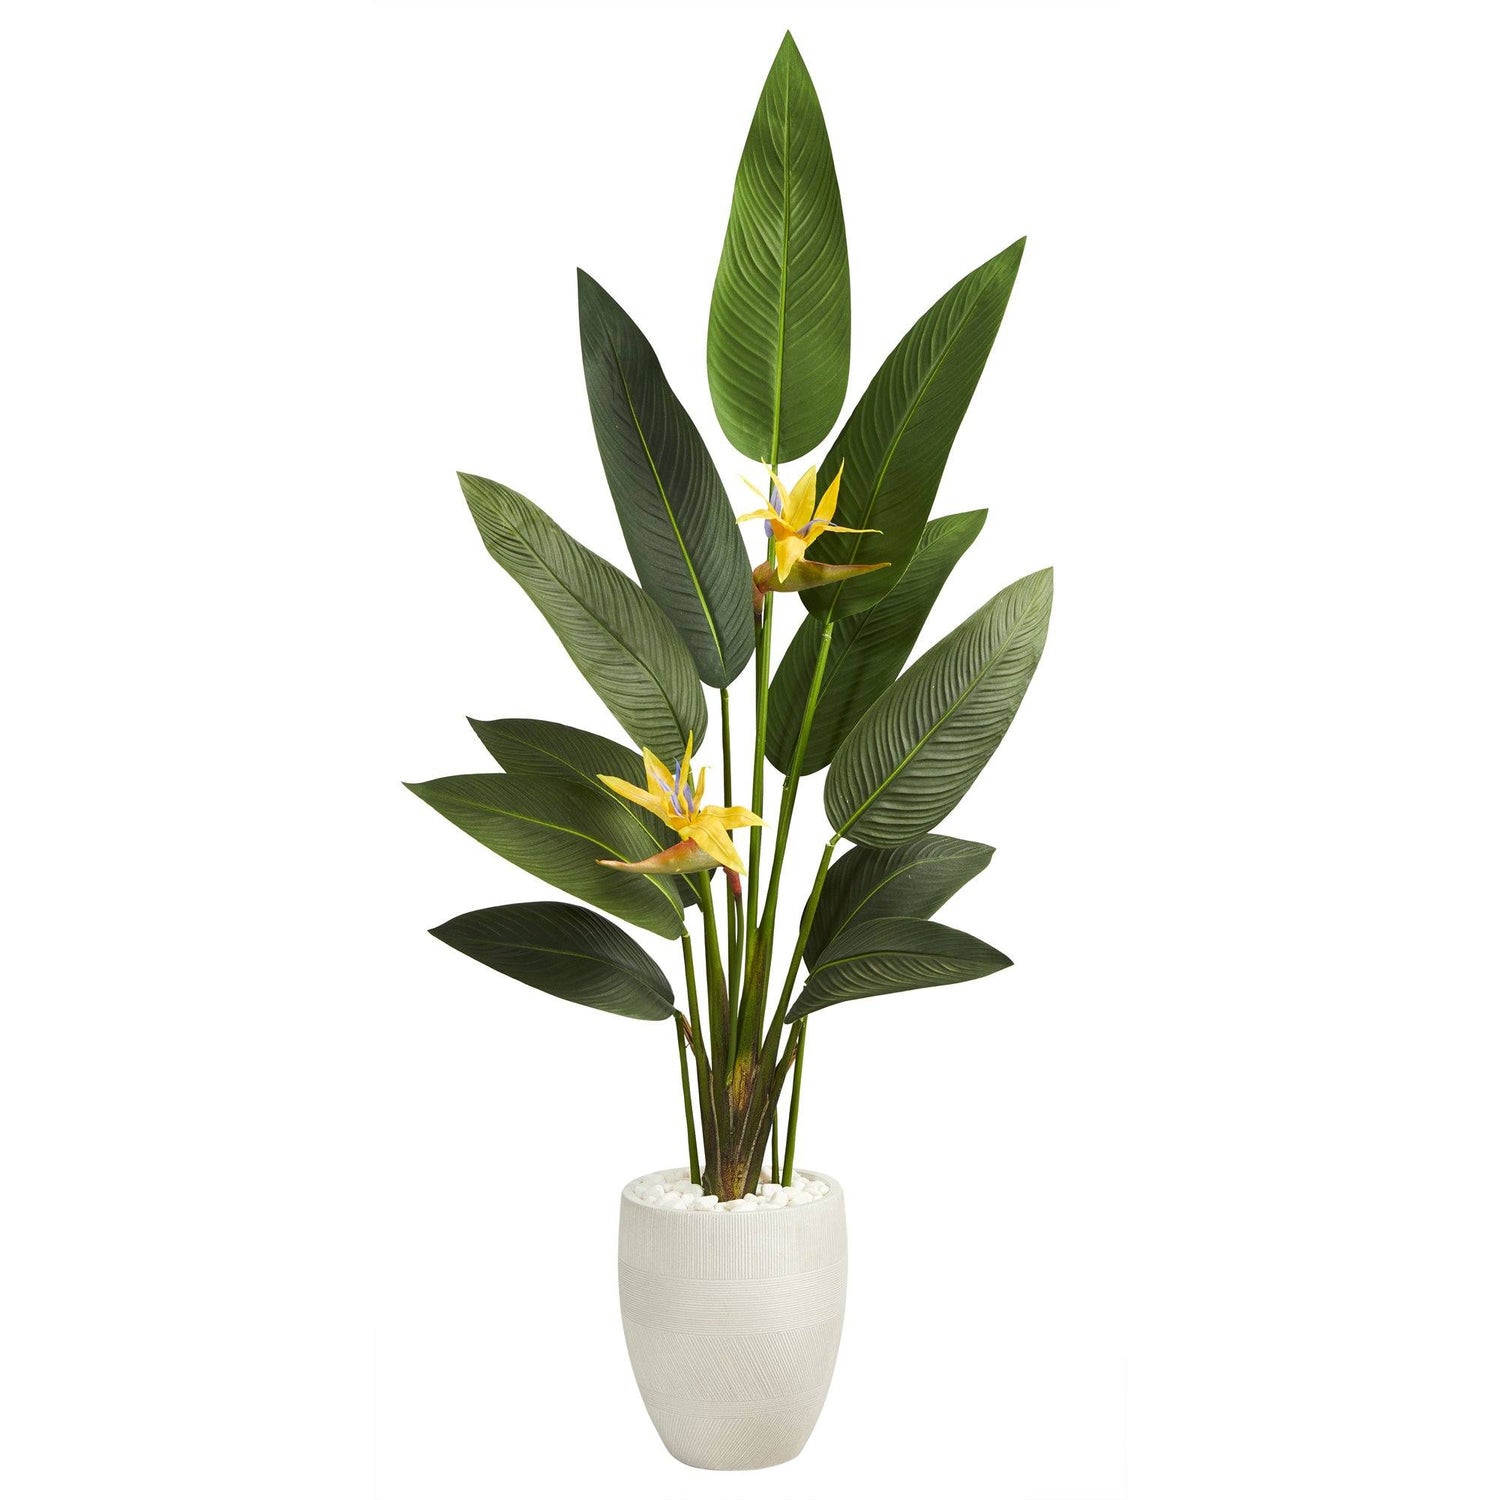 5’ Bird of Paradise Artificial Plant in White Planter (Real Touch)